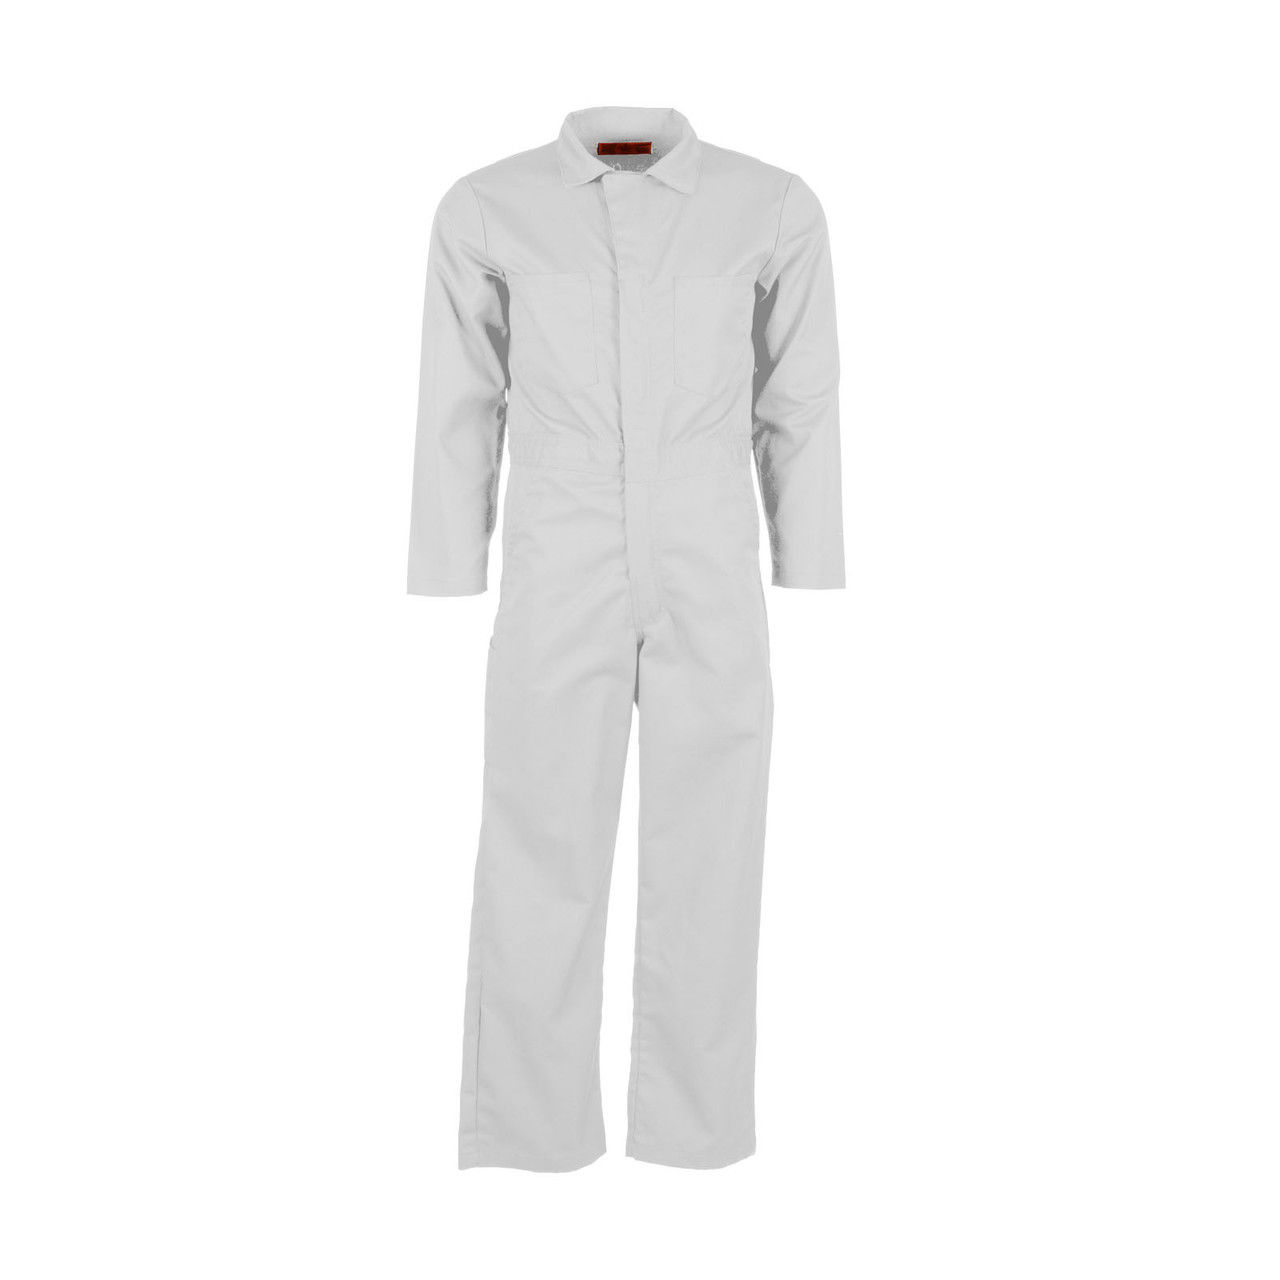 What is the description of the white coveralls by Pinnacle Textile?